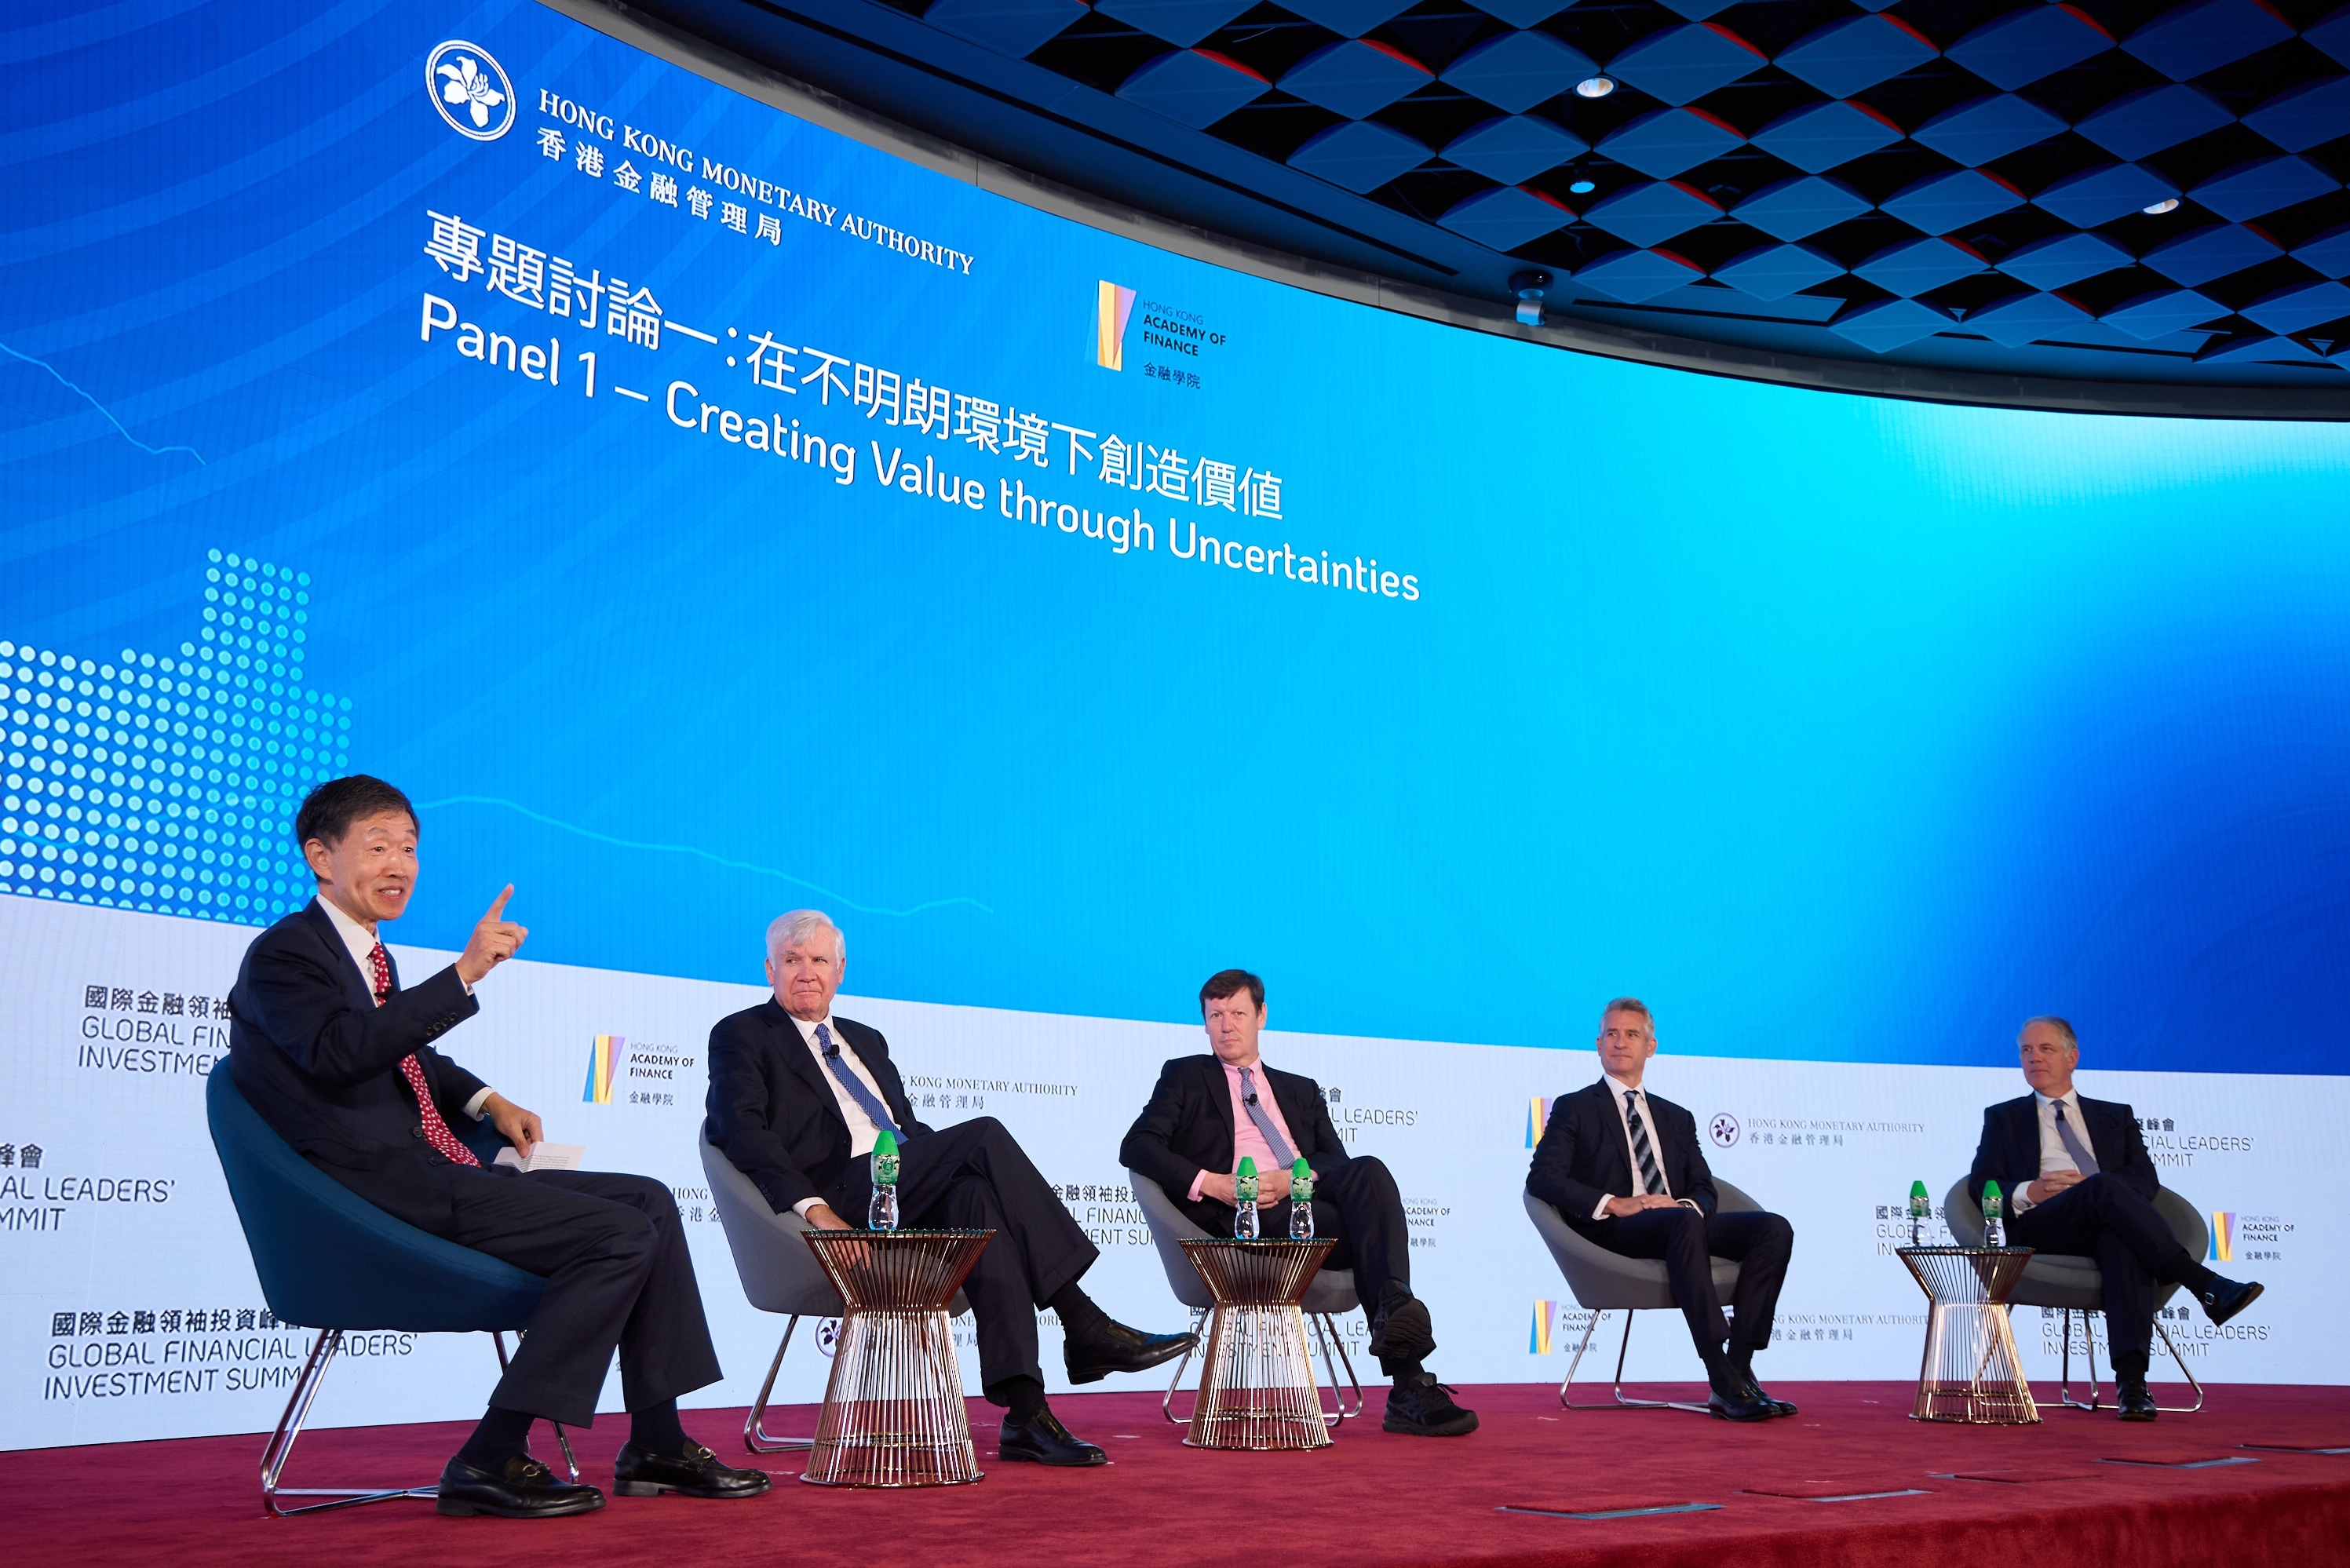 In the first panel discussion at the “Conversations with Global Investors” seminar of the Global Financial Leaders’ Investment Summit on 3 November, Mr Weijan Shan, Executive Chairman of PAG; Mr William E. Conway, Jr., Co-Founder, Interim CEO, and Co-Chairman of Carlyle; Mr Luke Ellis, CEO of Man Group; Mr Ben Way, Group Head of Macquarie Asset Management; and Mr Jim Zelter, Co-President of Apollo Asset Management, share their views on how to create value through uncertainties.